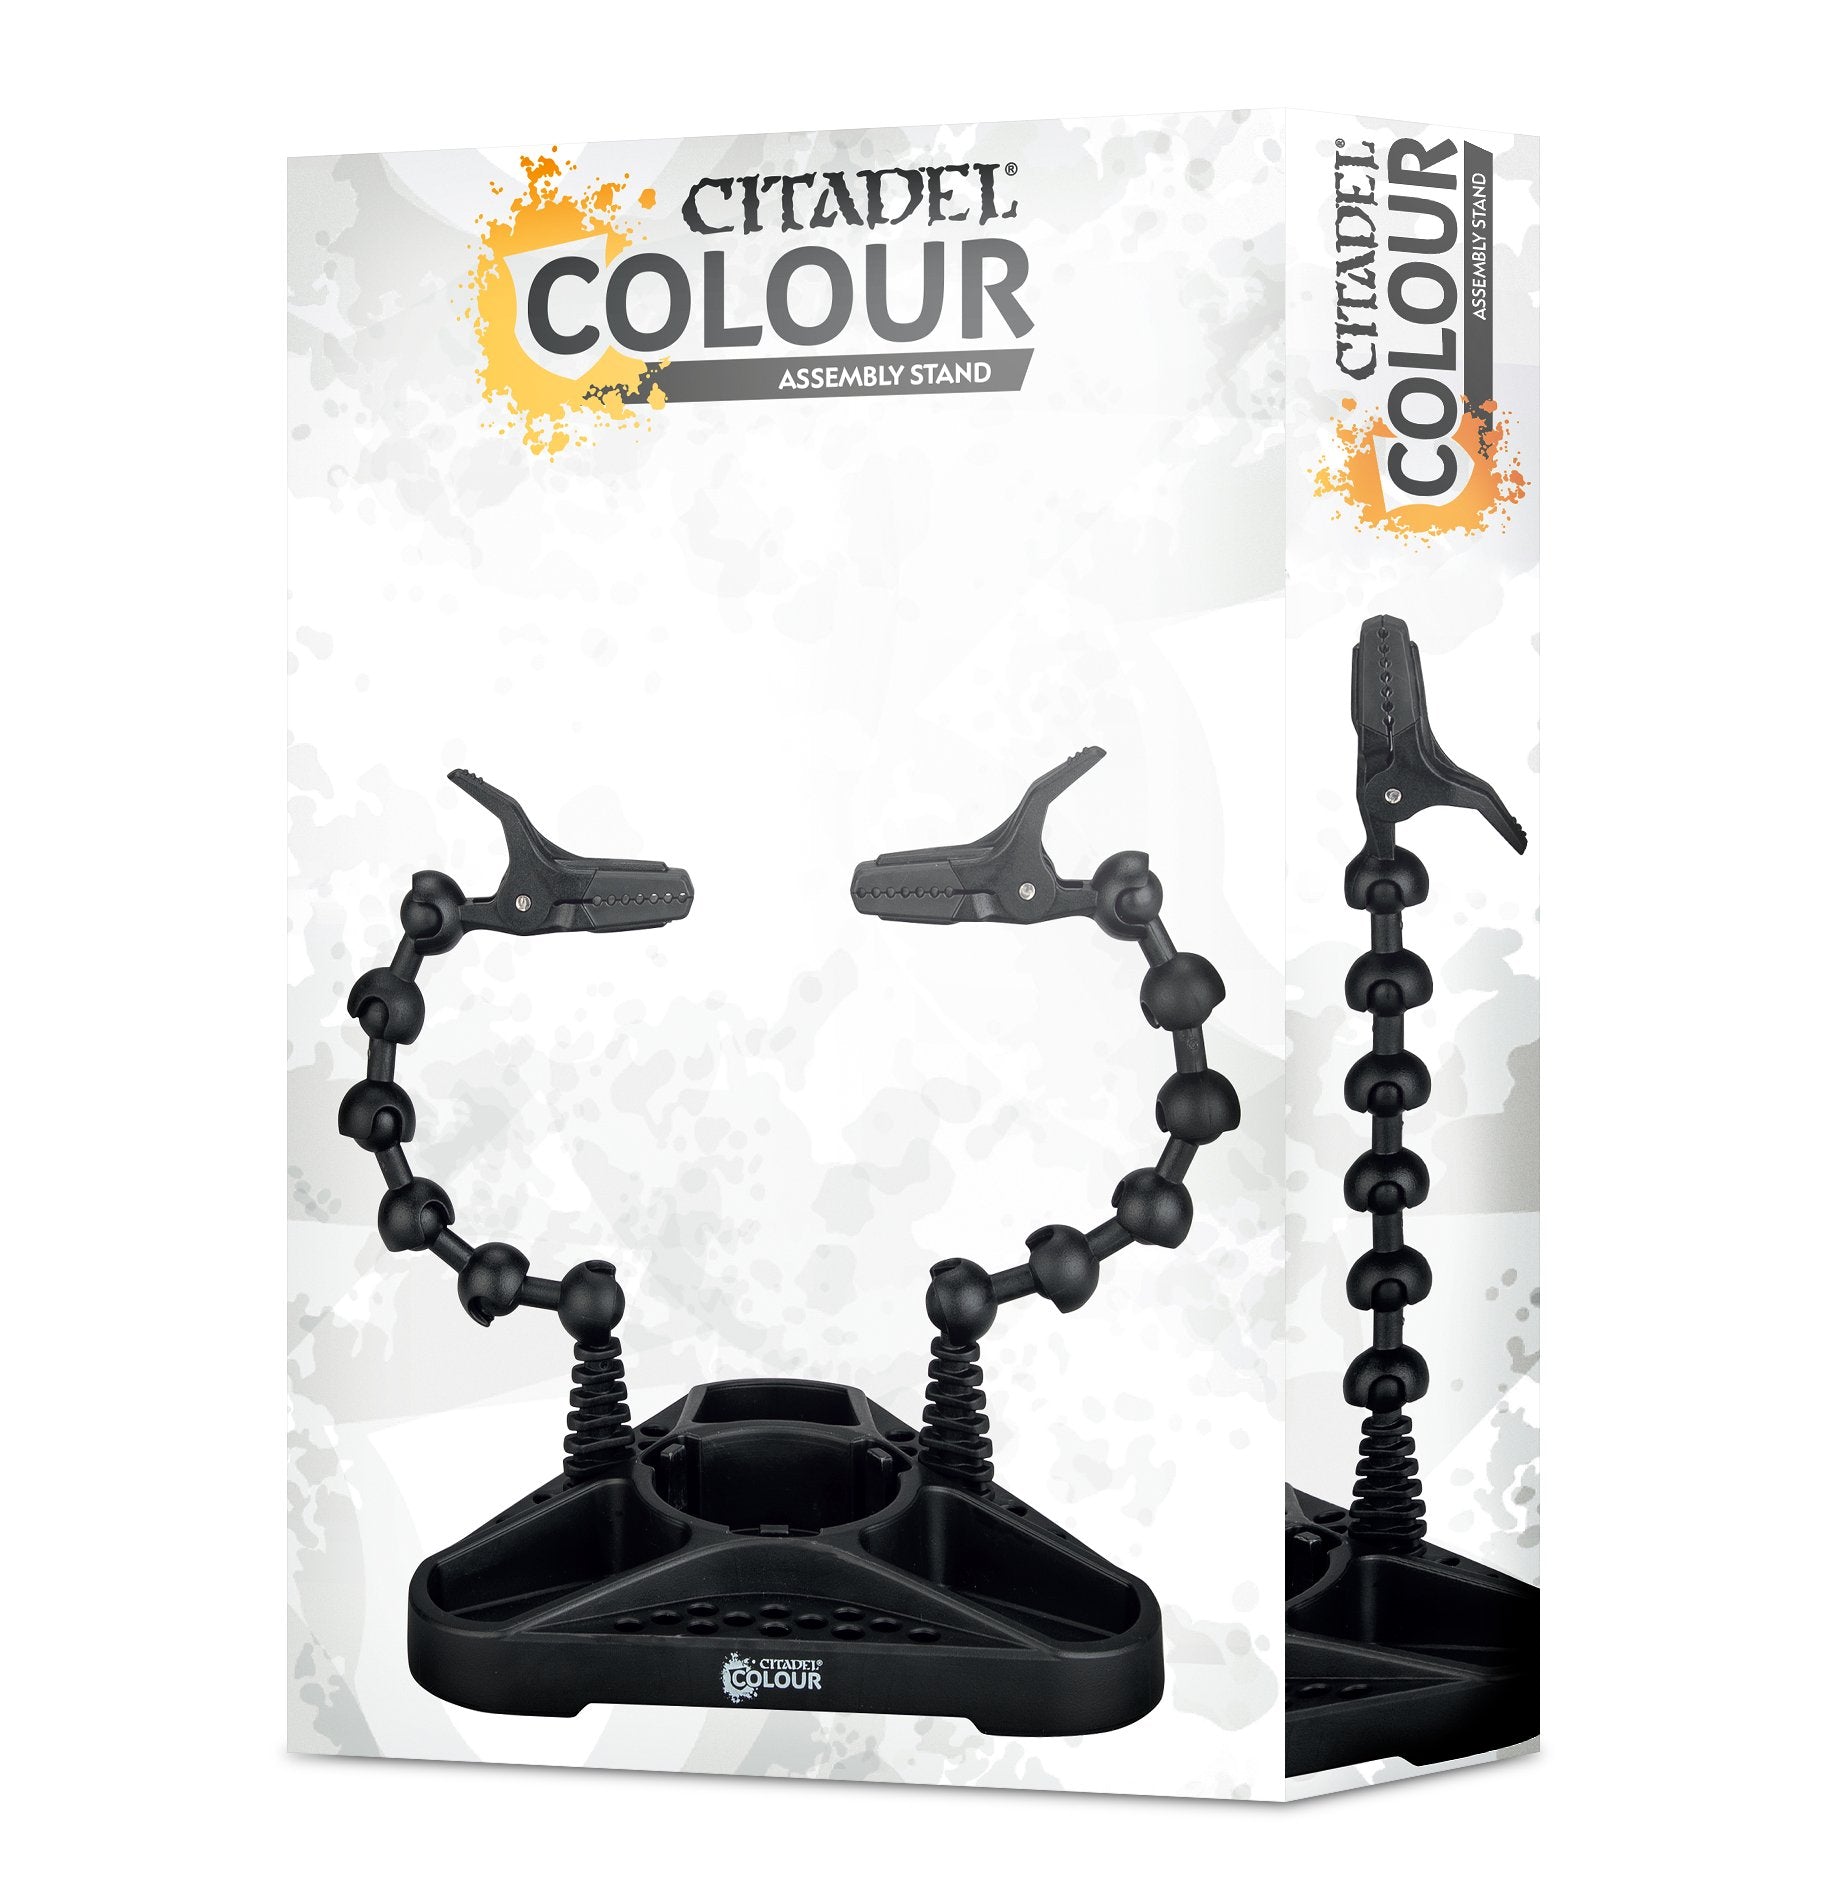 CITADEL COLOUR ASSEMBLY STAND | BD Cosmos